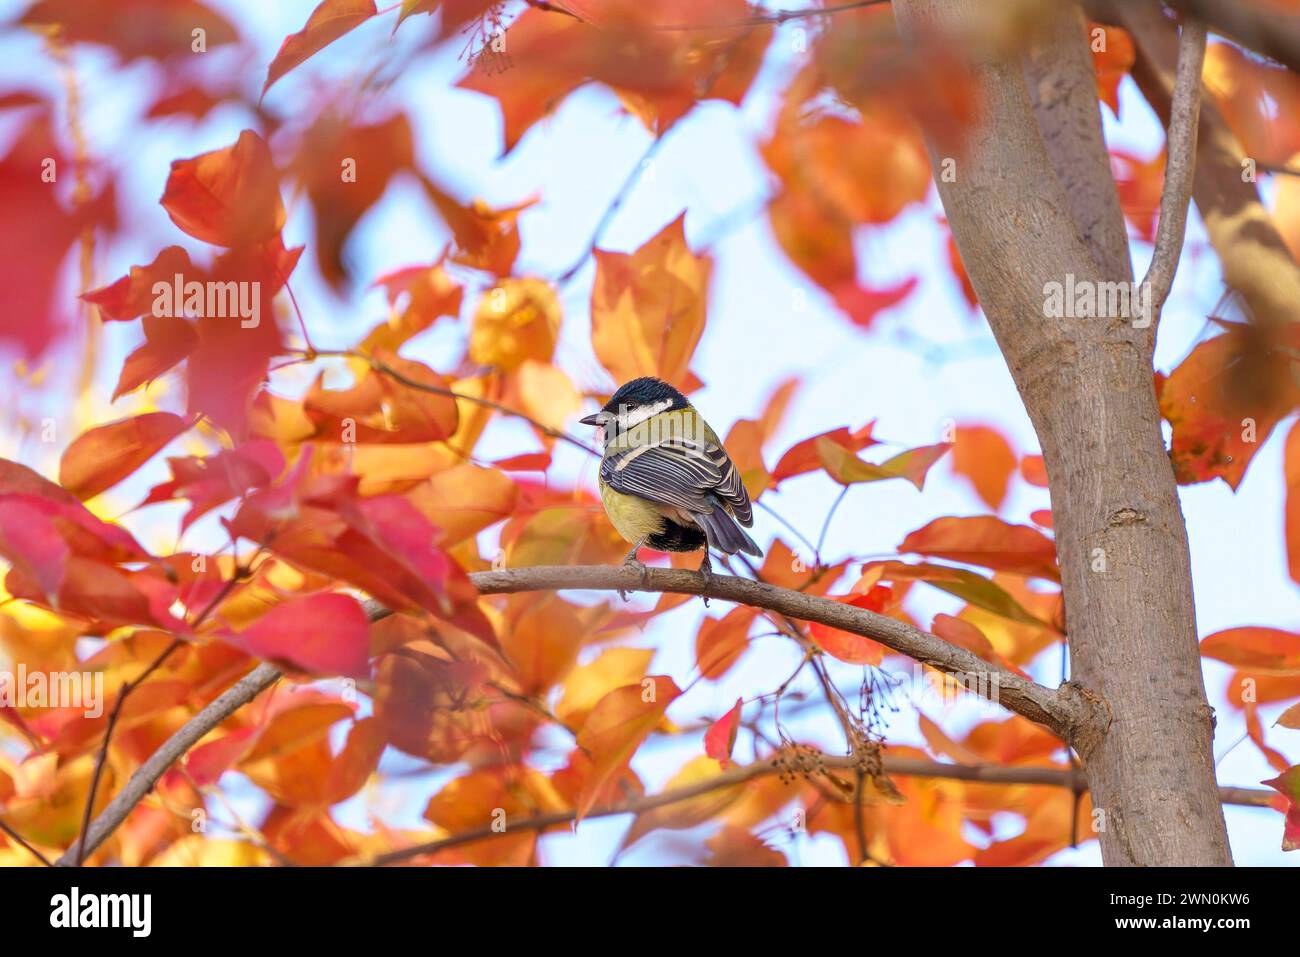 A great tit bird among the colorful leaves Stock Photo